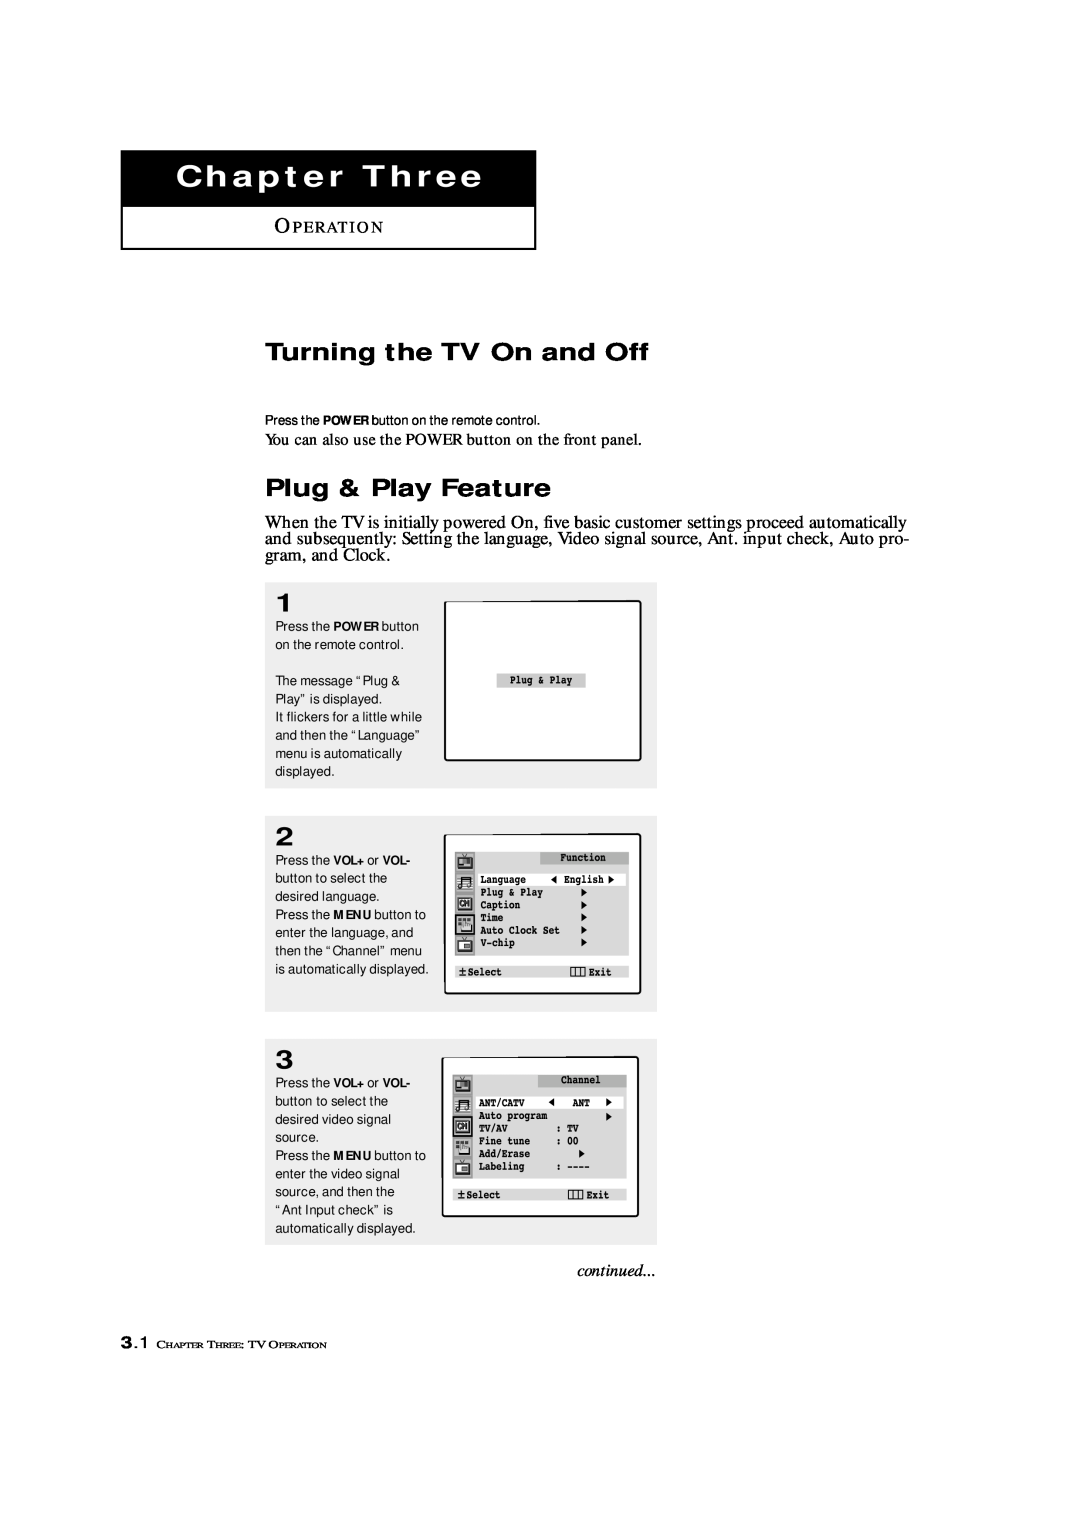 Samsung TXM 2797HF, TXM 2796HF Chapter Three, Turning the TV On and Off, Plug & Play Feature, continued, O P E R At I O N 